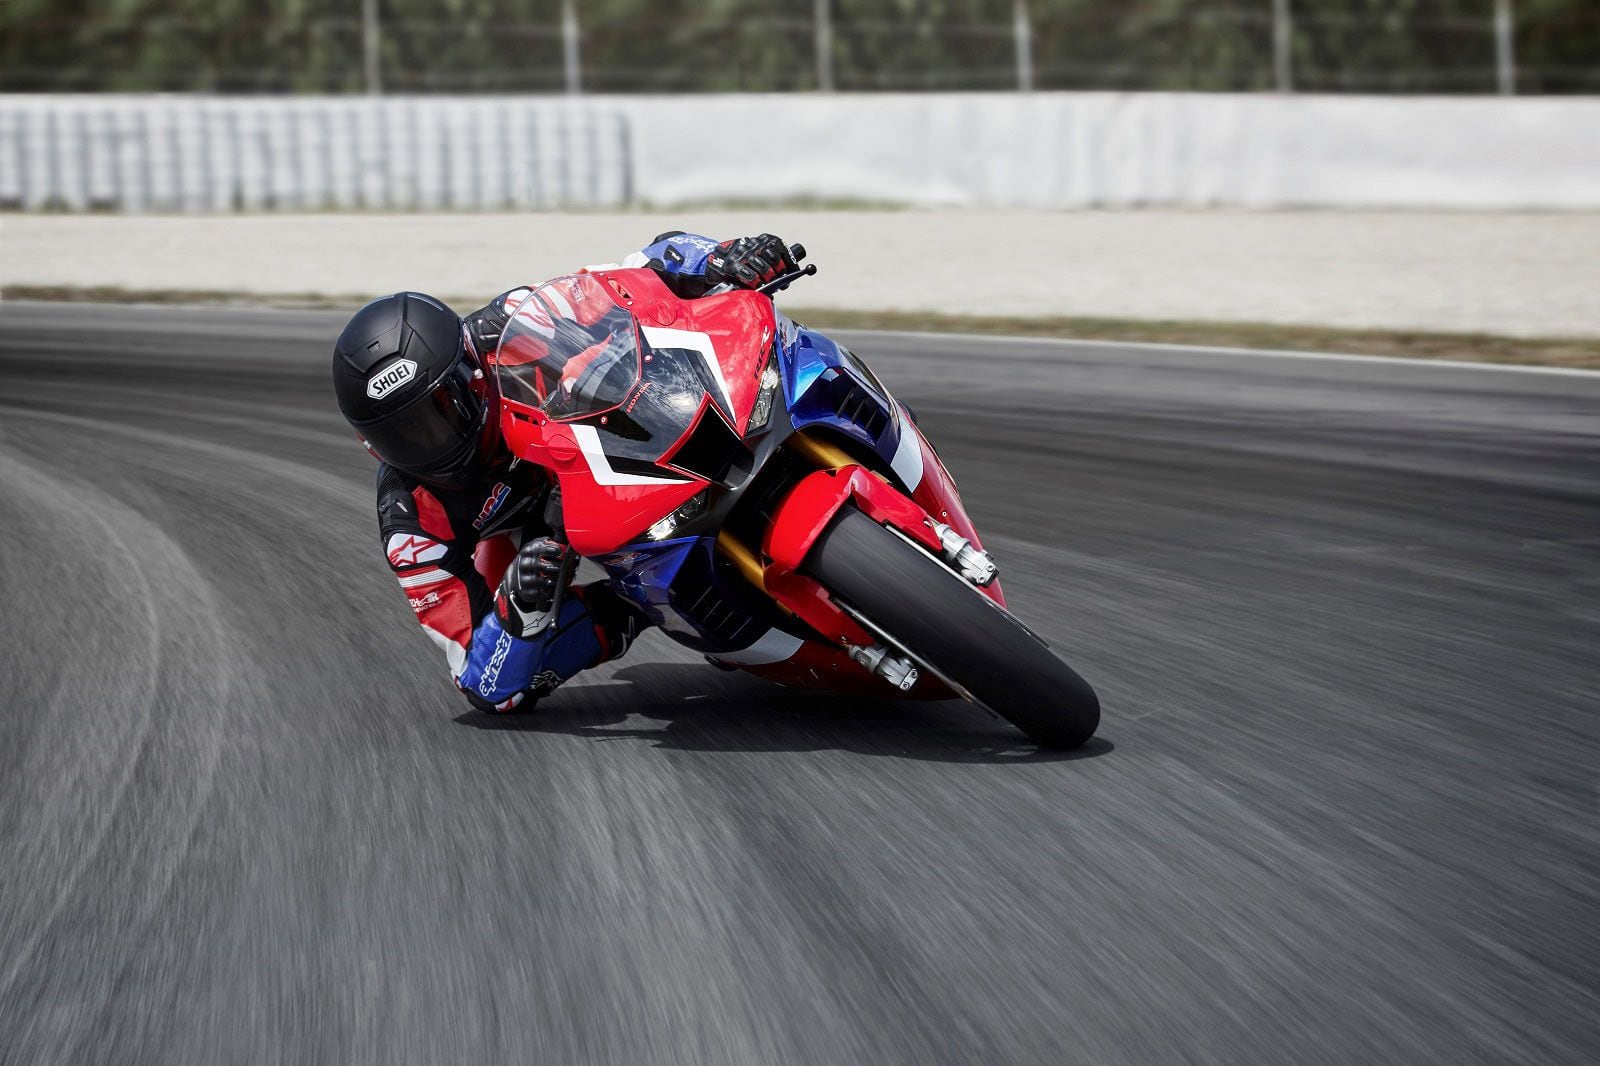 Will we see a new CBR1000RR-R for 2022? Rumors seem to suggest an SP2 version is in the works. The current Fireblade SP is pictured.